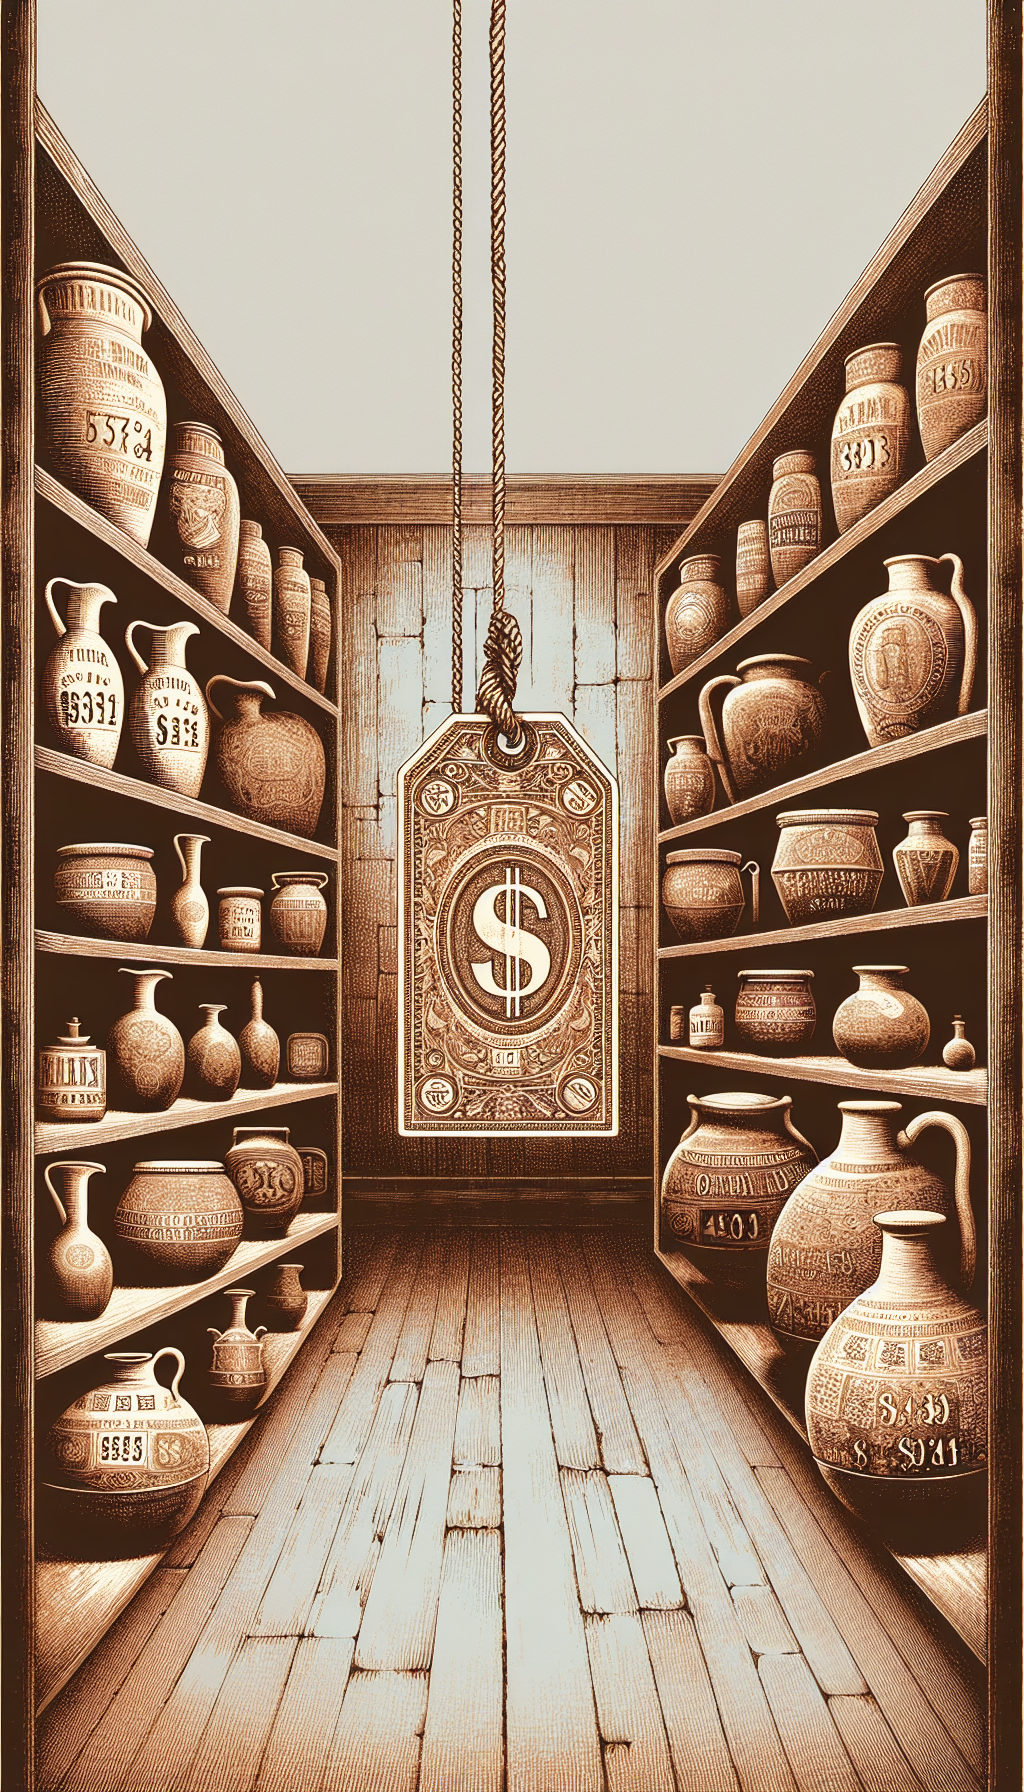 An illustration depicts a rustic, sepia-toned gallery, with shelves of vintage crocks and jugs of varying shapes and sizes; each piece is etched with significant historical dates and emblems. A centered, ornate, old-fashioned price tag dangles with a shimmer, subtly reflecting their unexpected worth, blending the artifacts' age with their current allure, as dollar signs subtly merge with the intricate patterns.